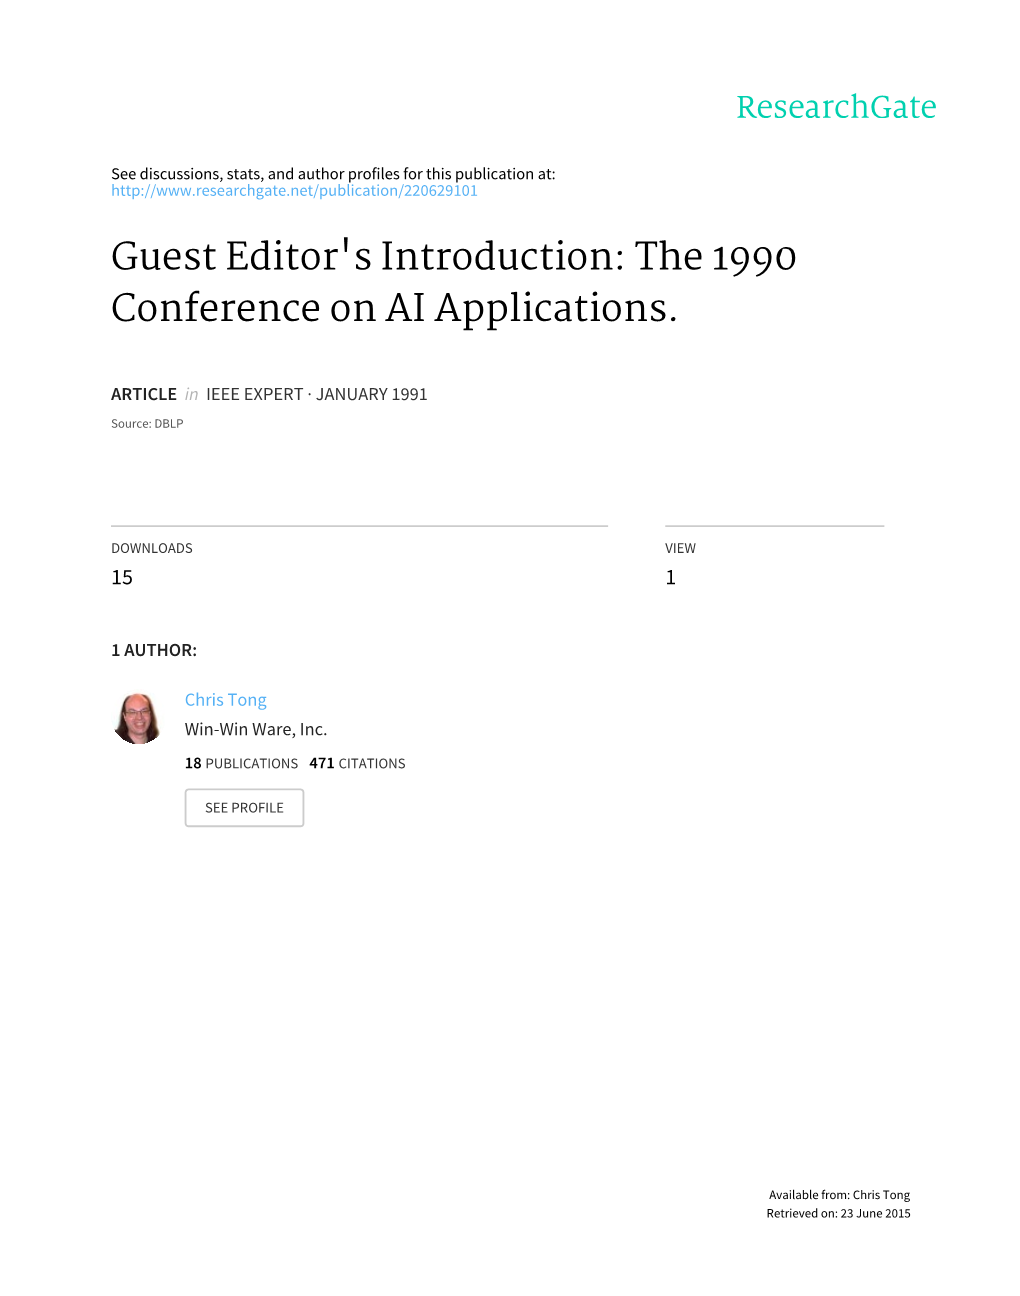 Guest Editor's Introduction: the 1990 Conference on AI Applications